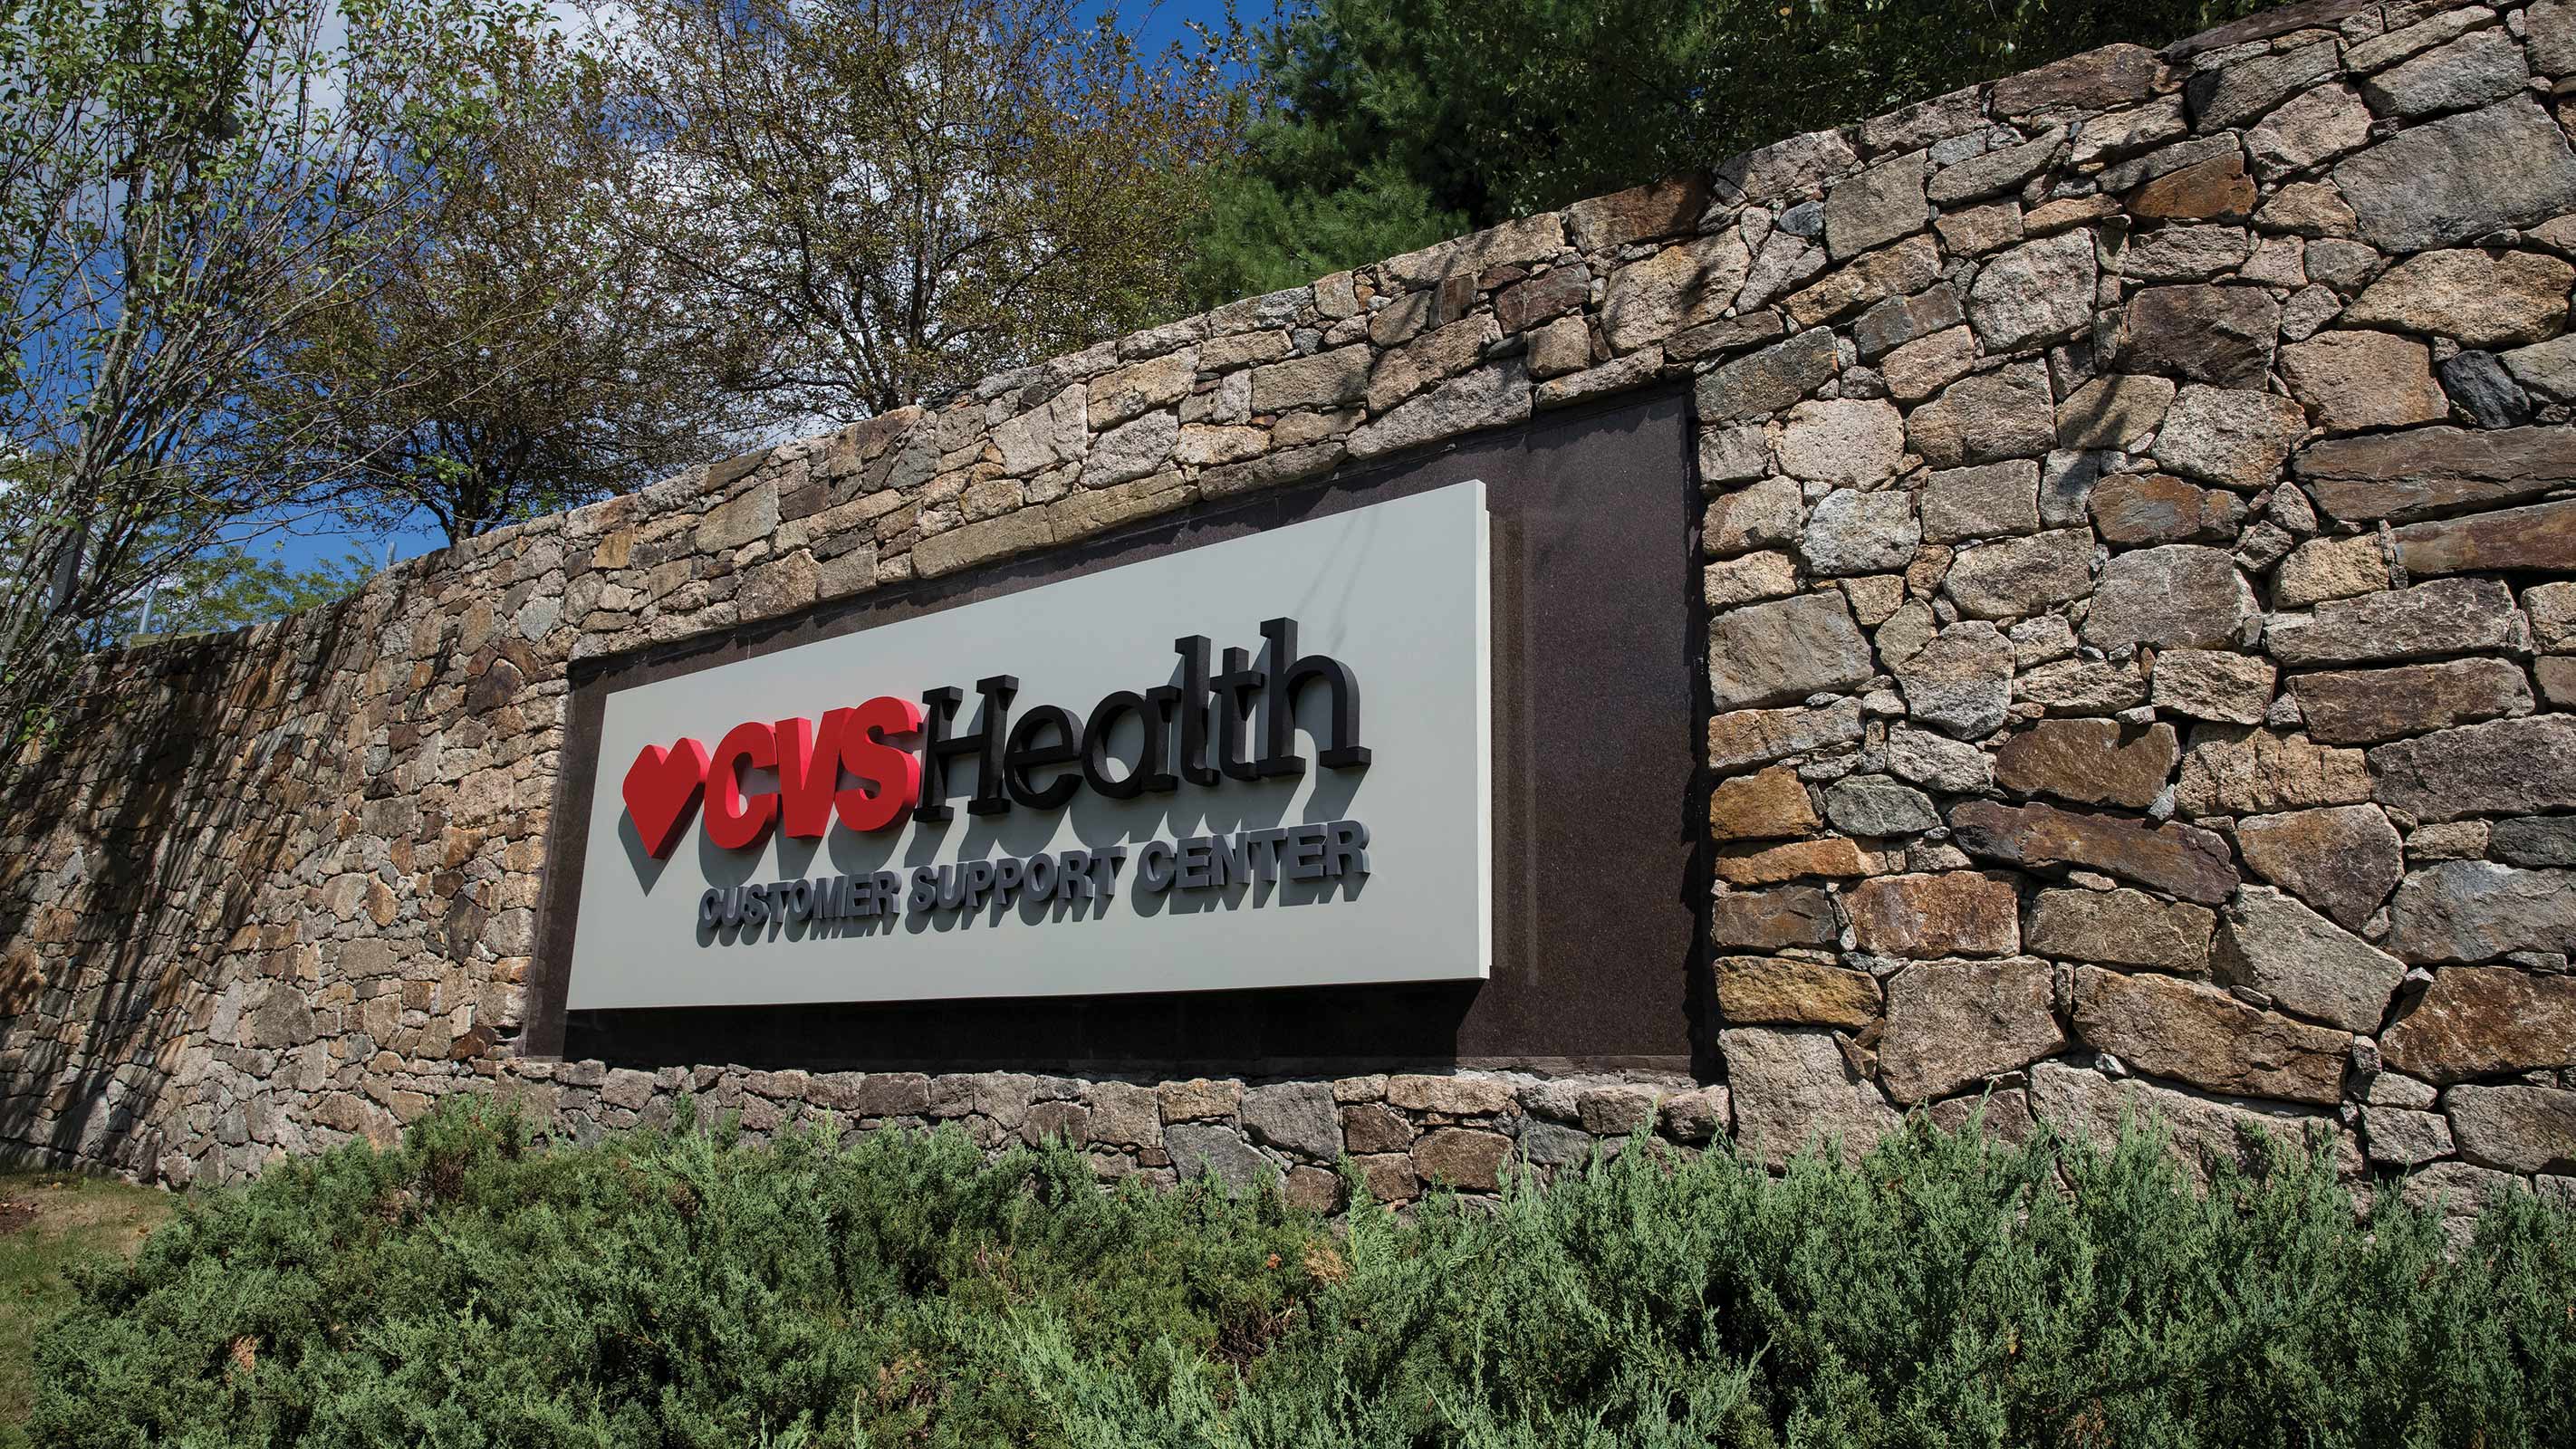 A photo of the exterior sign on the stone wall, outside of the CVS Health Customer Service Center in Woonsocket, Rhode Island.